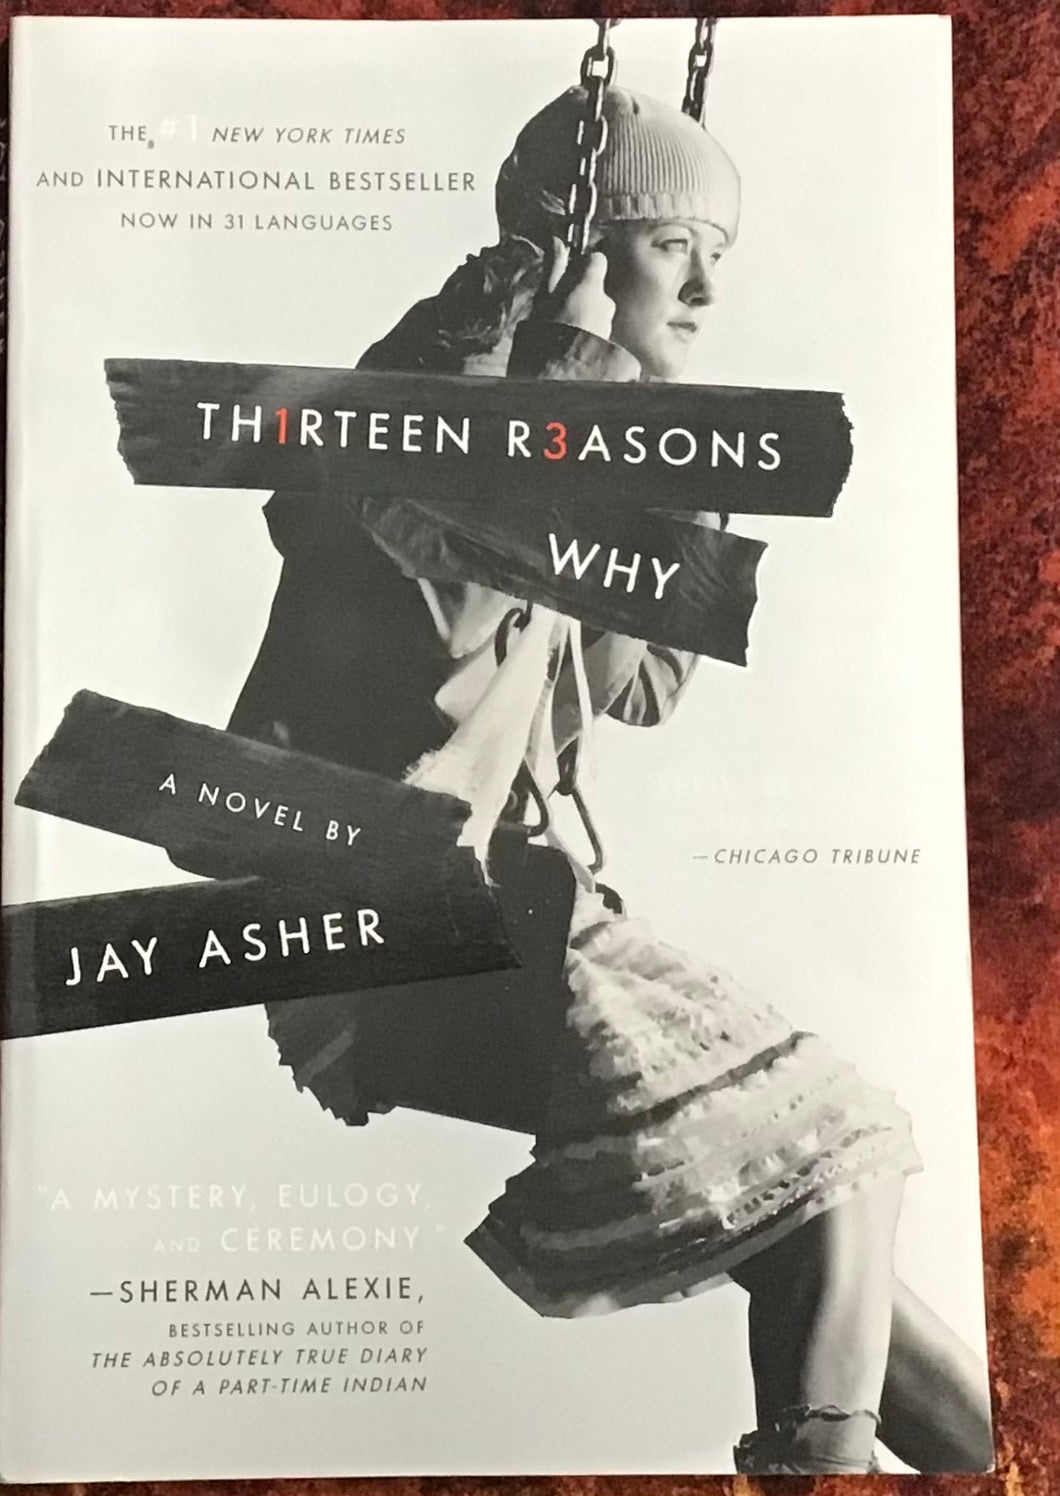 Thirteen Reasons Why, by Jay Asher